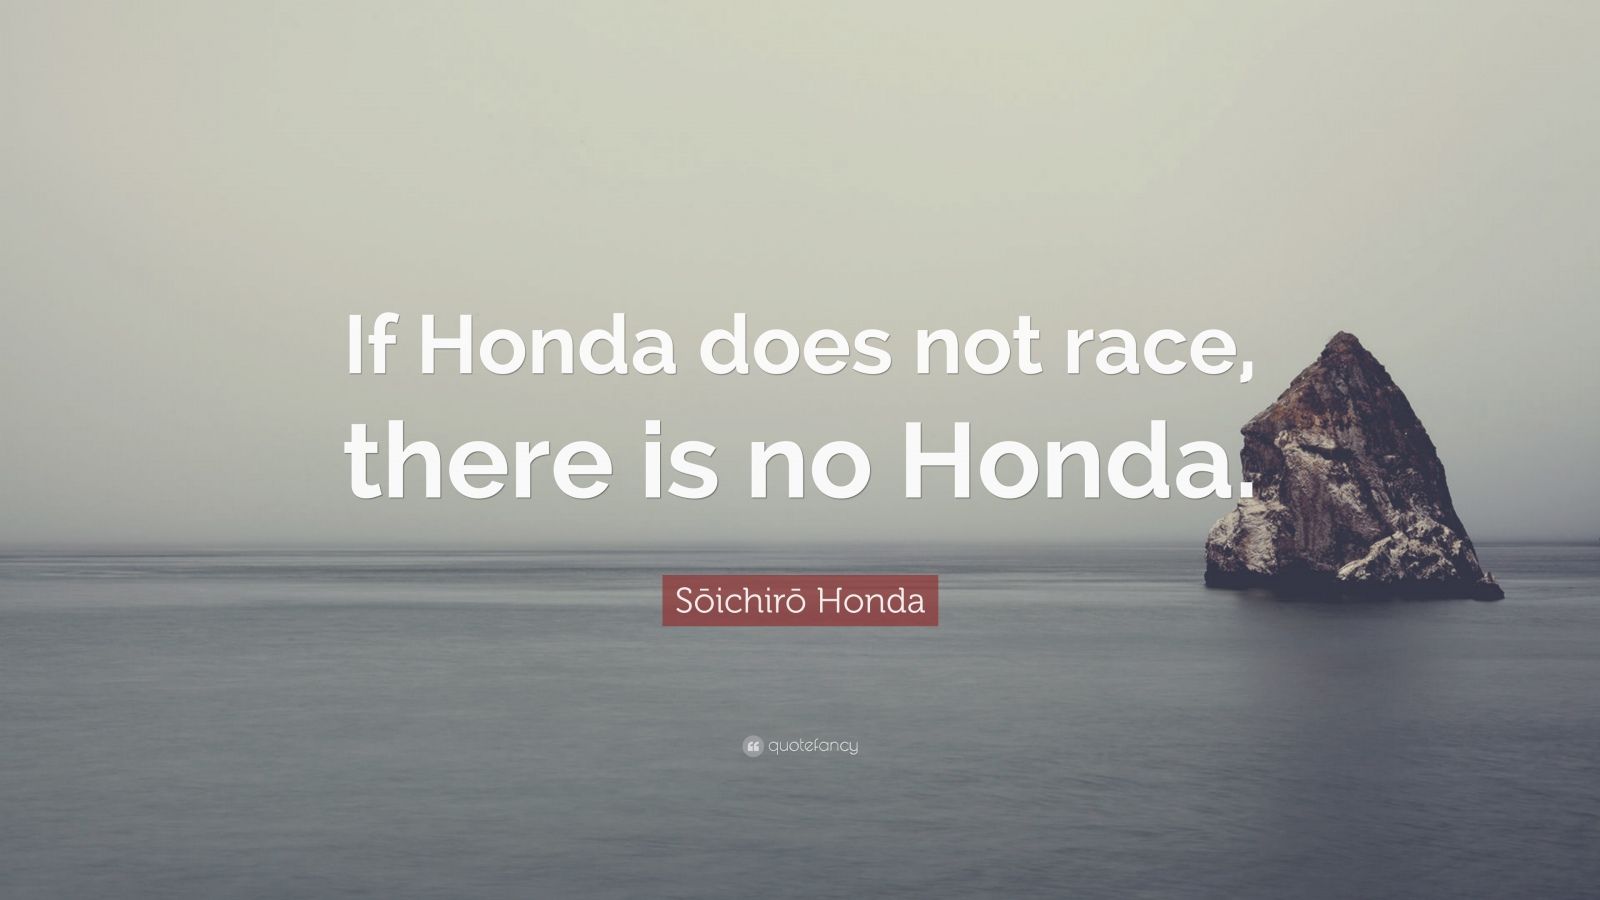 Sōichirō Honda Quote: “If Honda does not race, there is no Honda.” (12 wallpapers) - Quotefancy